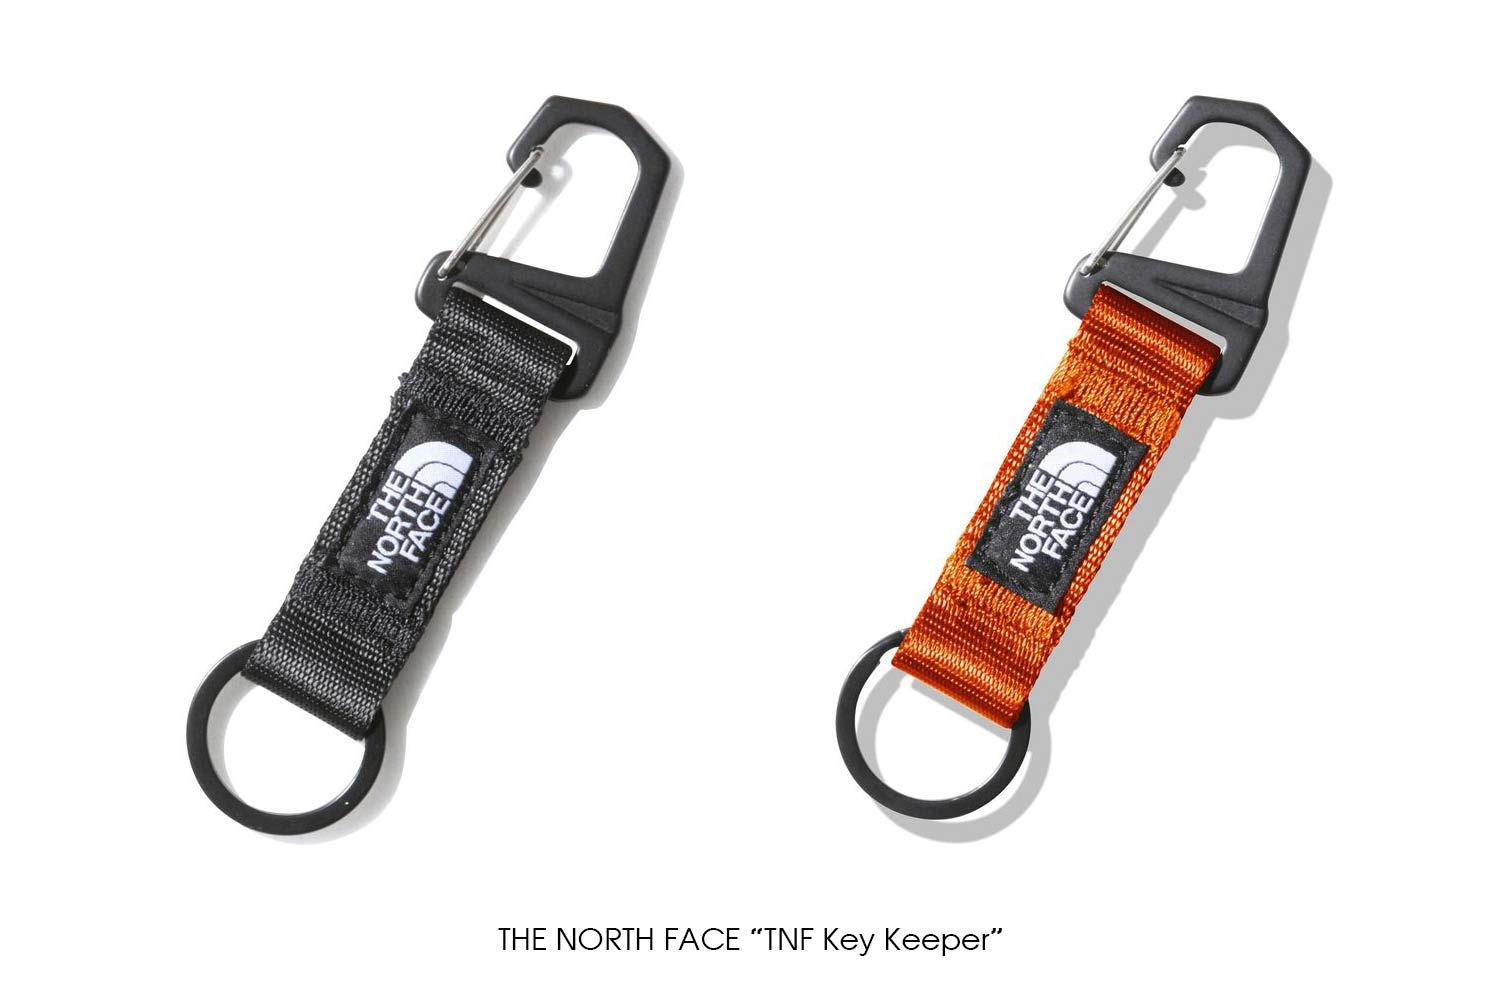 THE NORTH FACE "TNF Key Keeper"